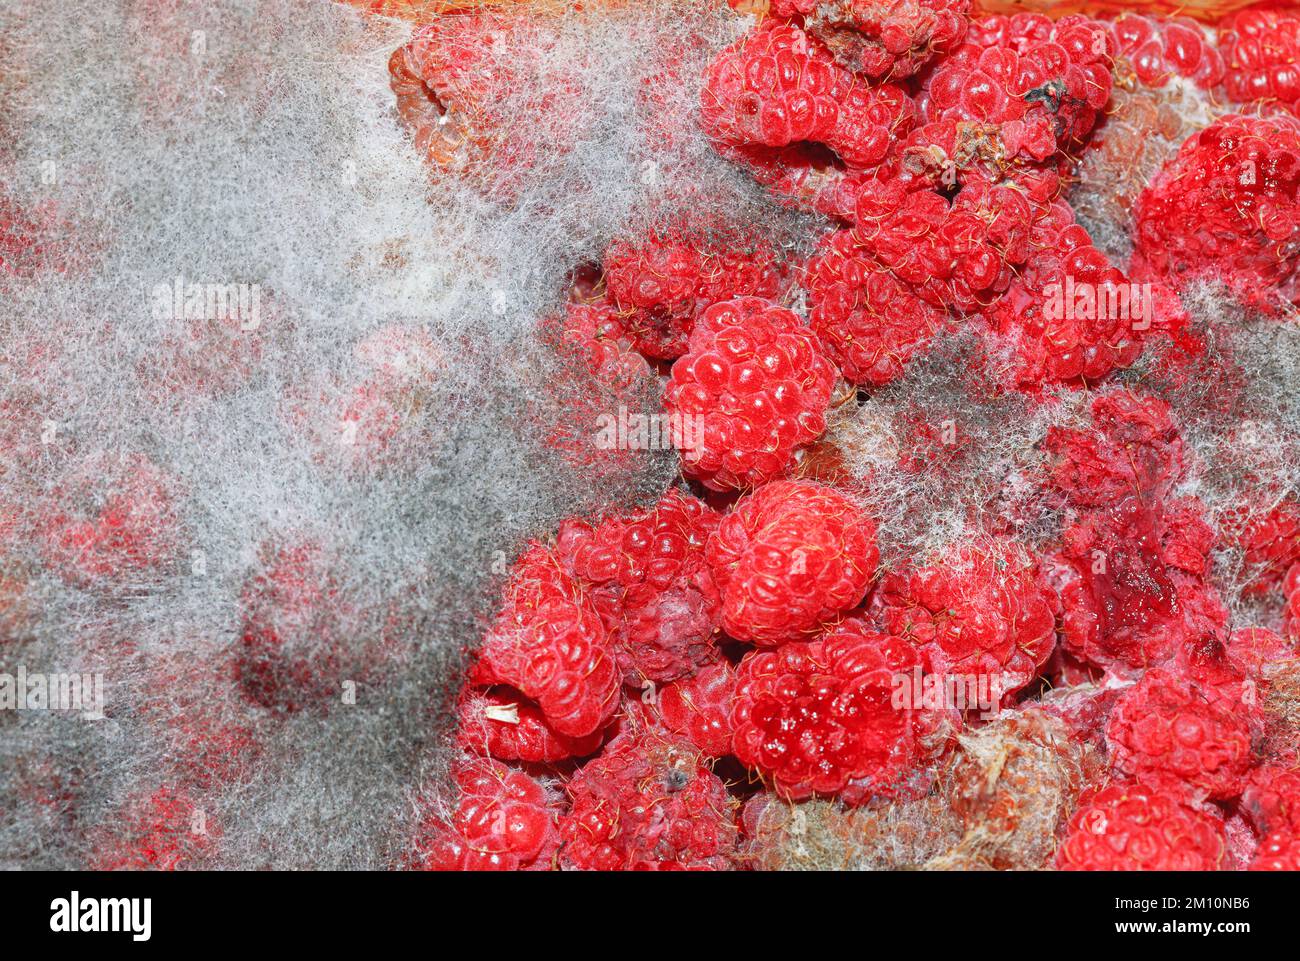 Raspberry with mold . Red berries in mildew Stock Photo